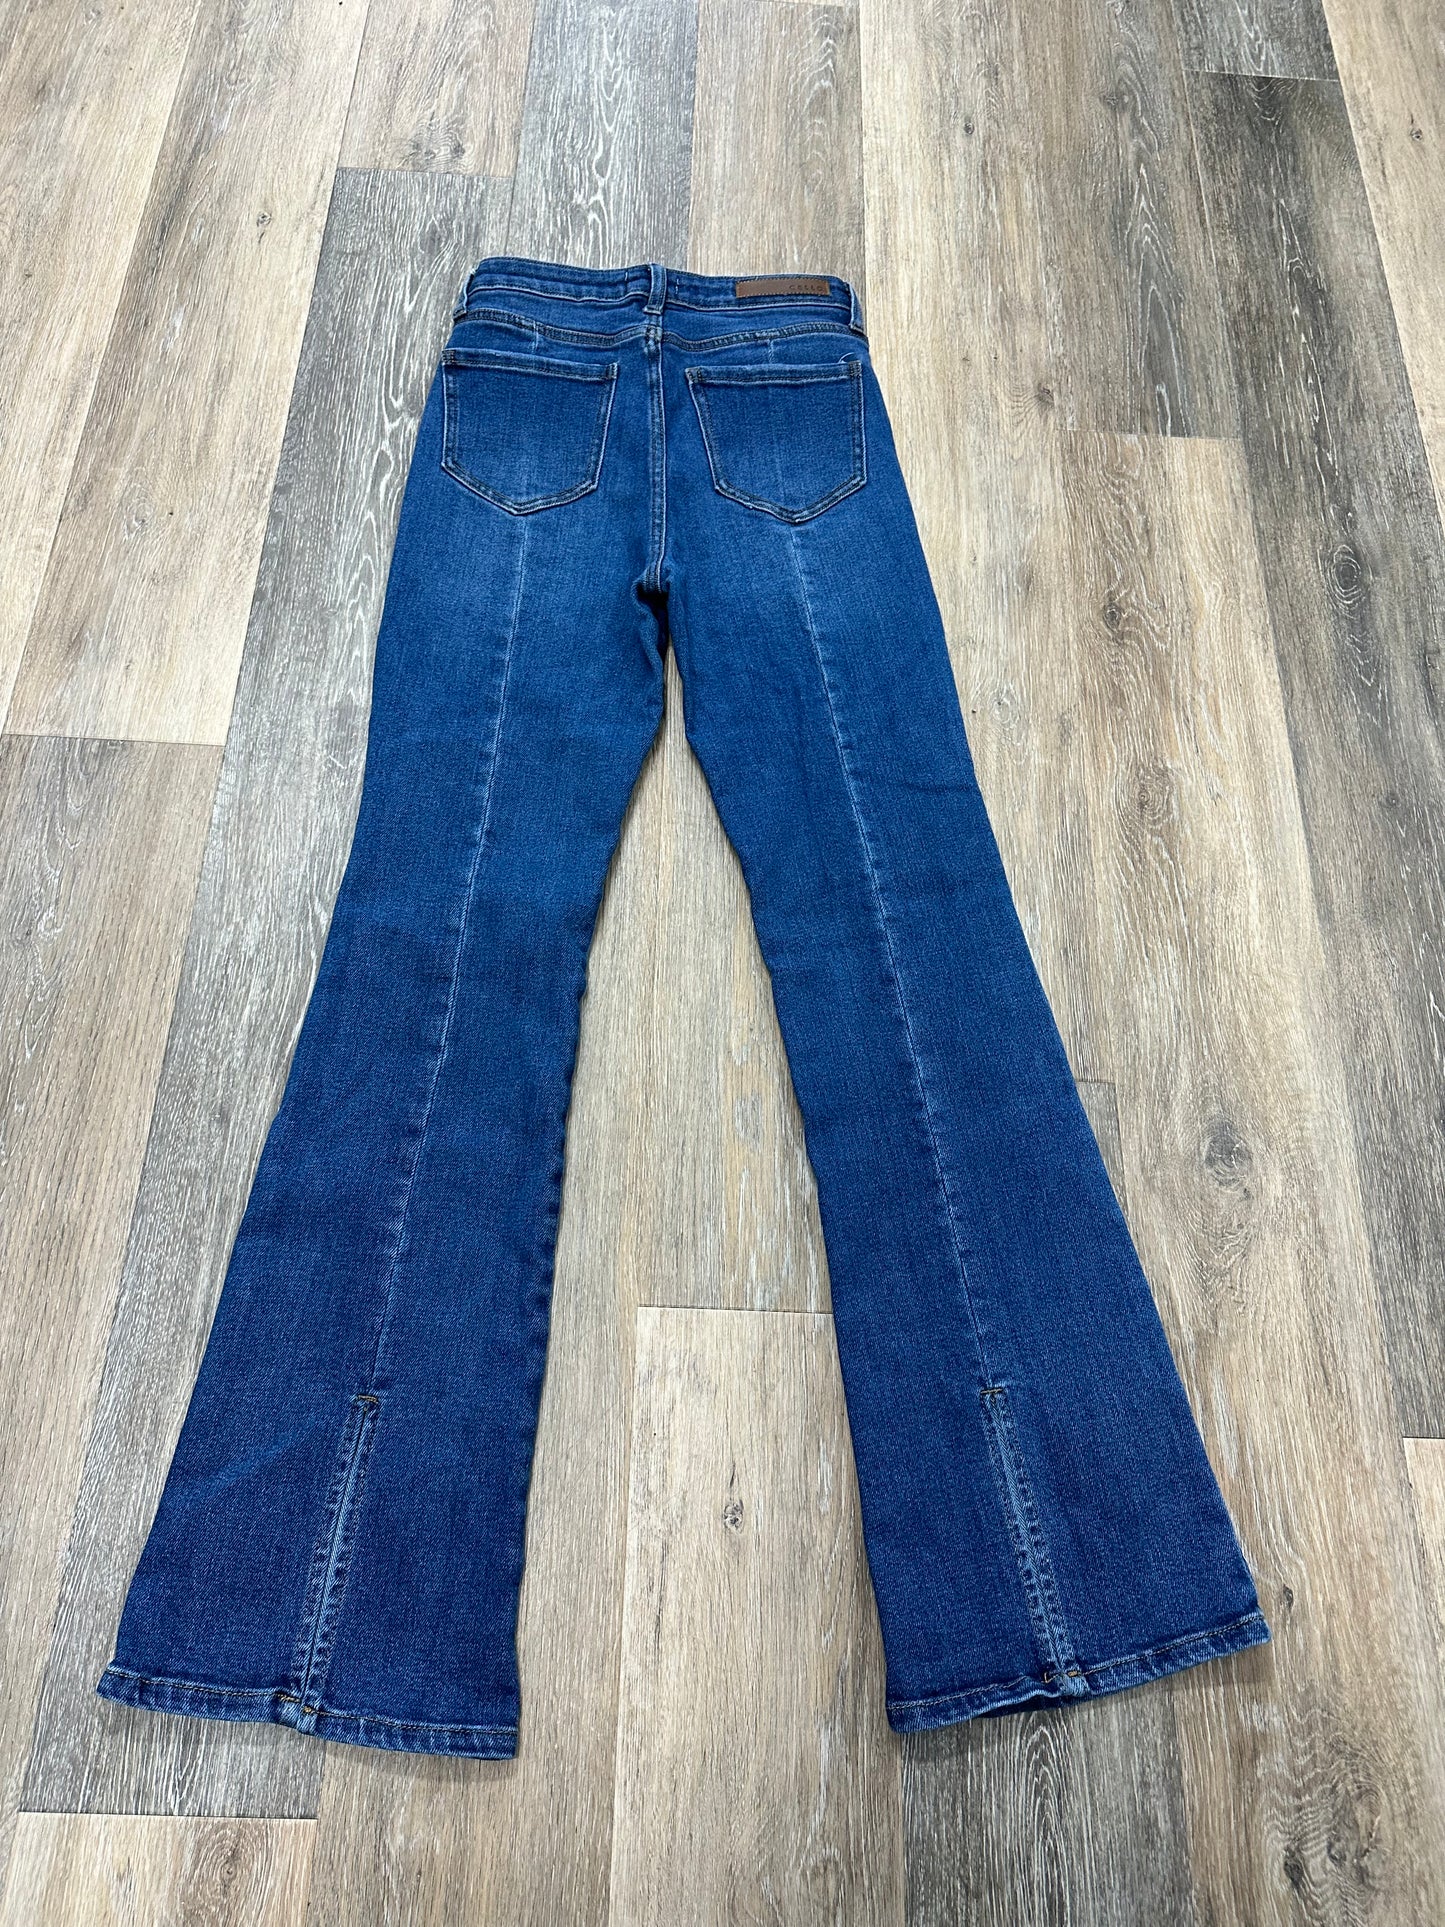 Jeans Boot Cut By Cello  Size: 3